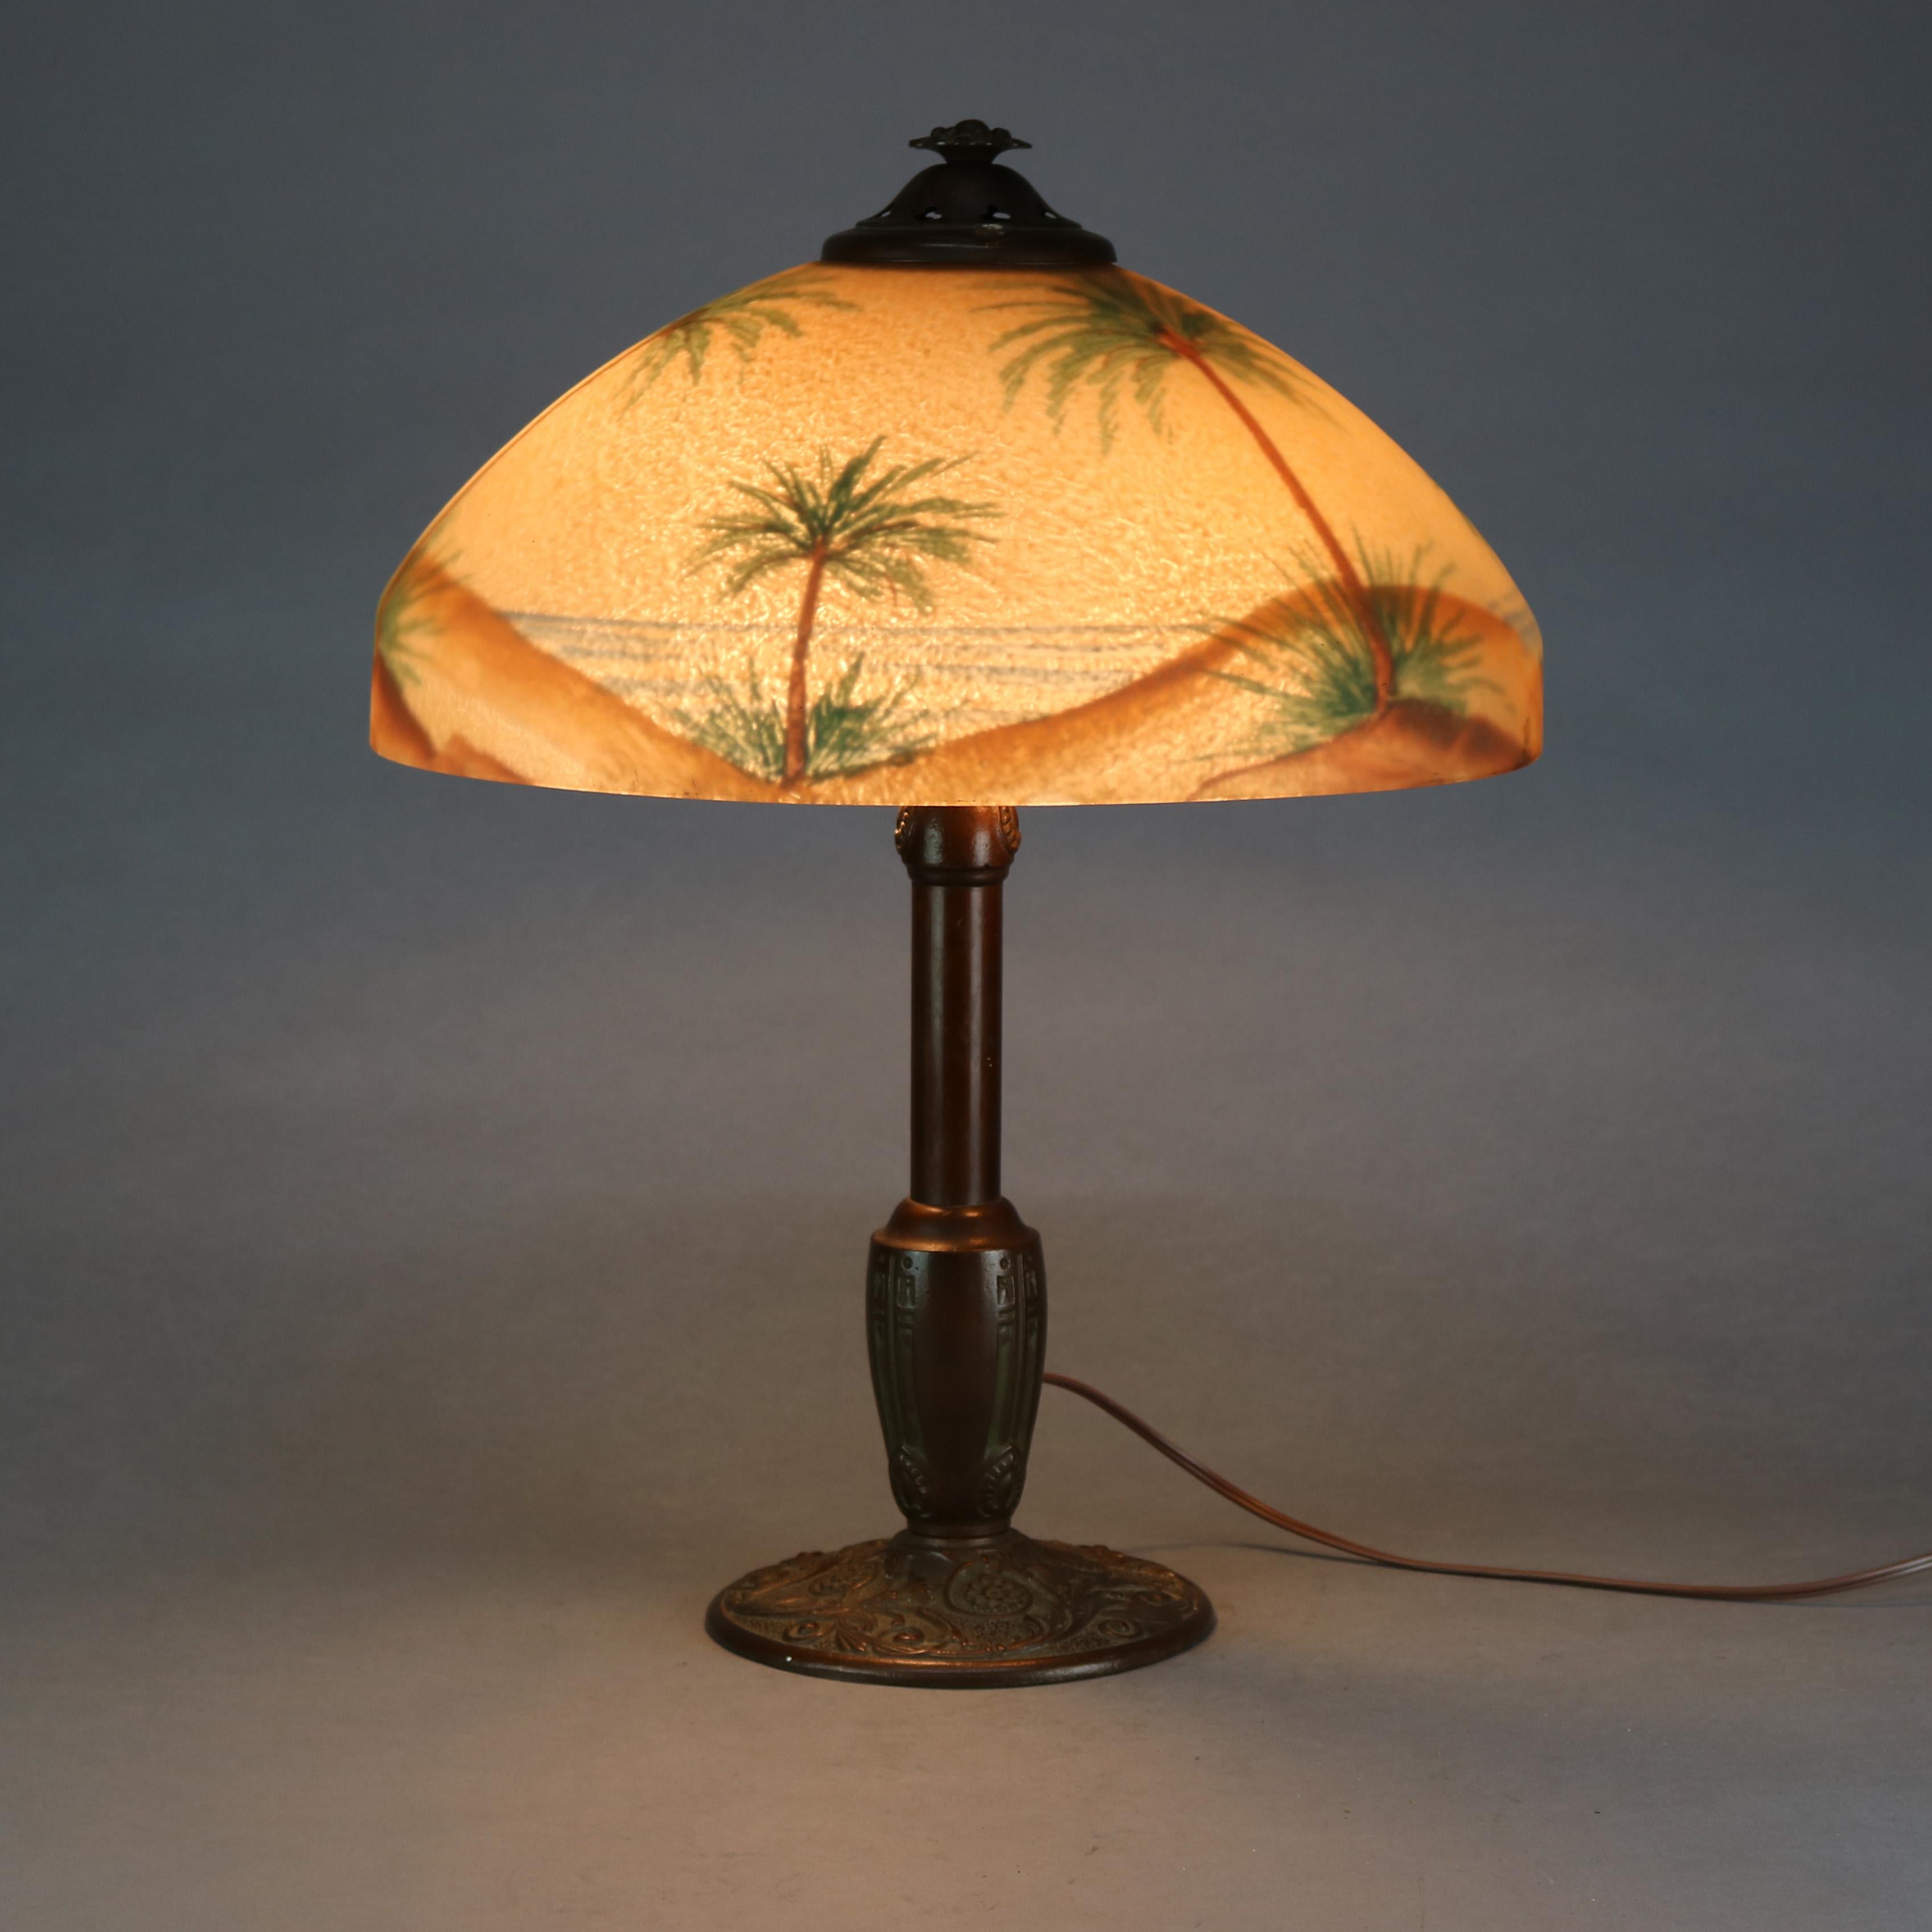 Metal Pittsburgh Reverse Painted Arts & Crafts Beach Sunset with Palms Table Lamp 1920